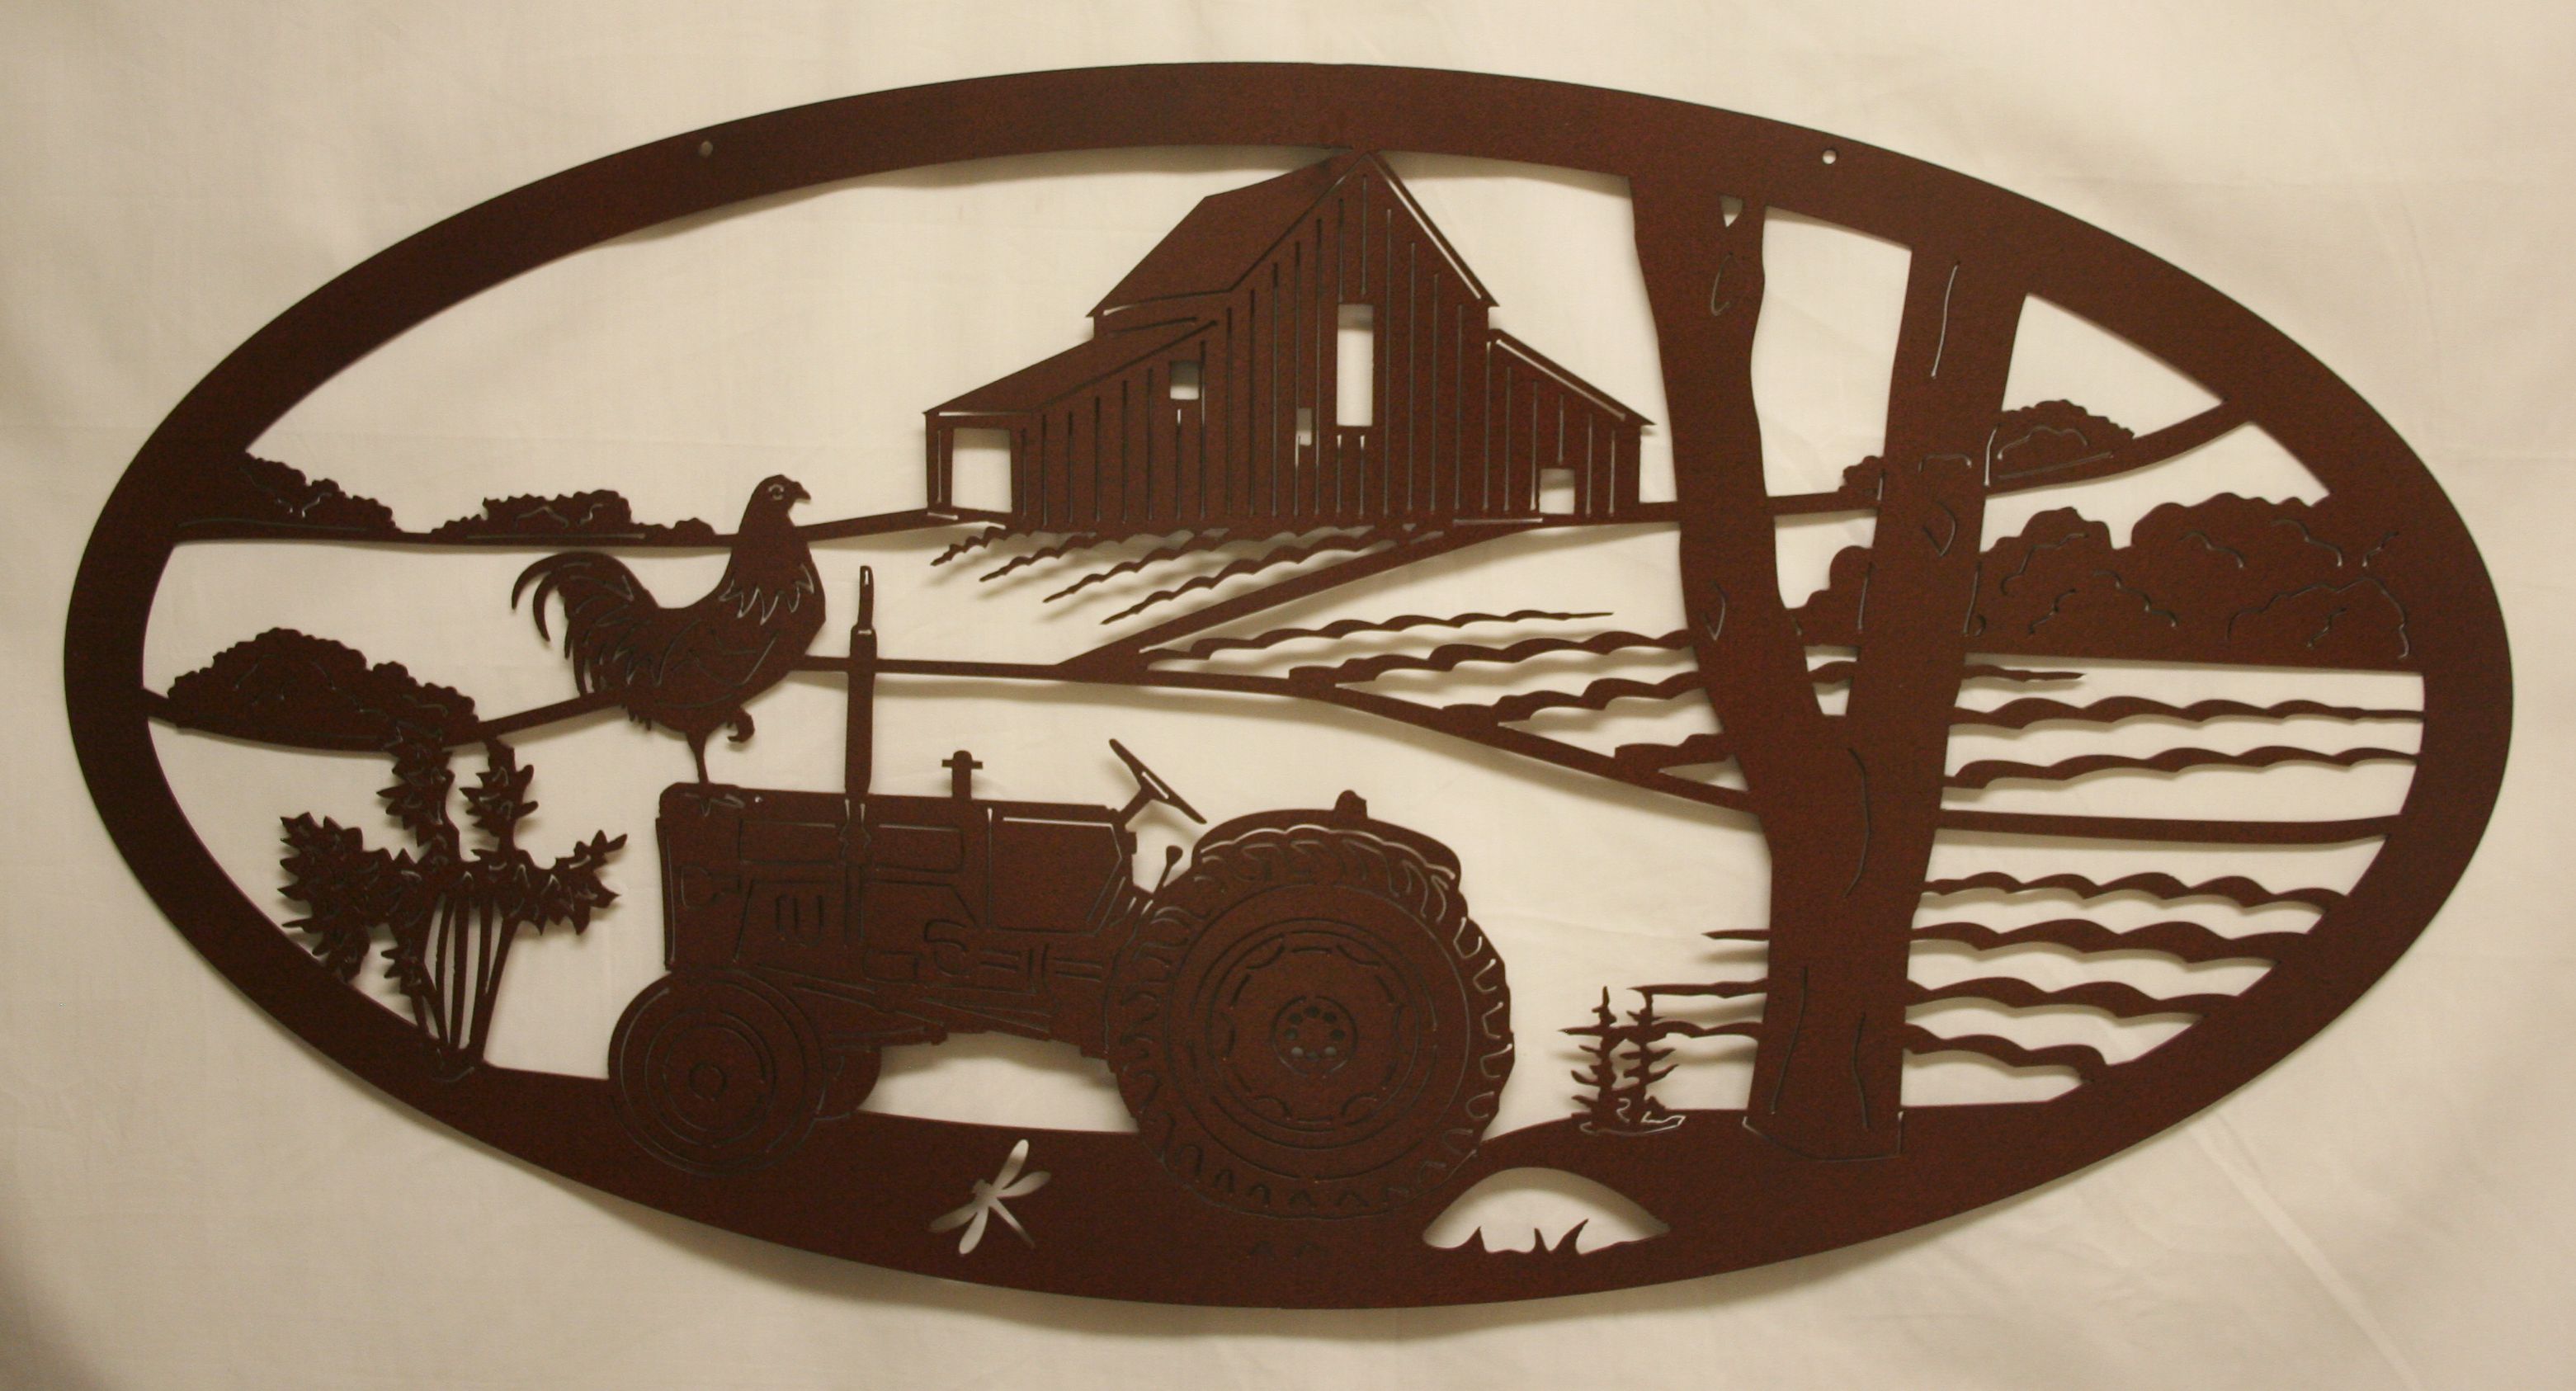 Metal Art, Ford Tractor, Tractor, Field, Crop, Rooster, Dragonfly, Barn, Farm, Tree, Woods